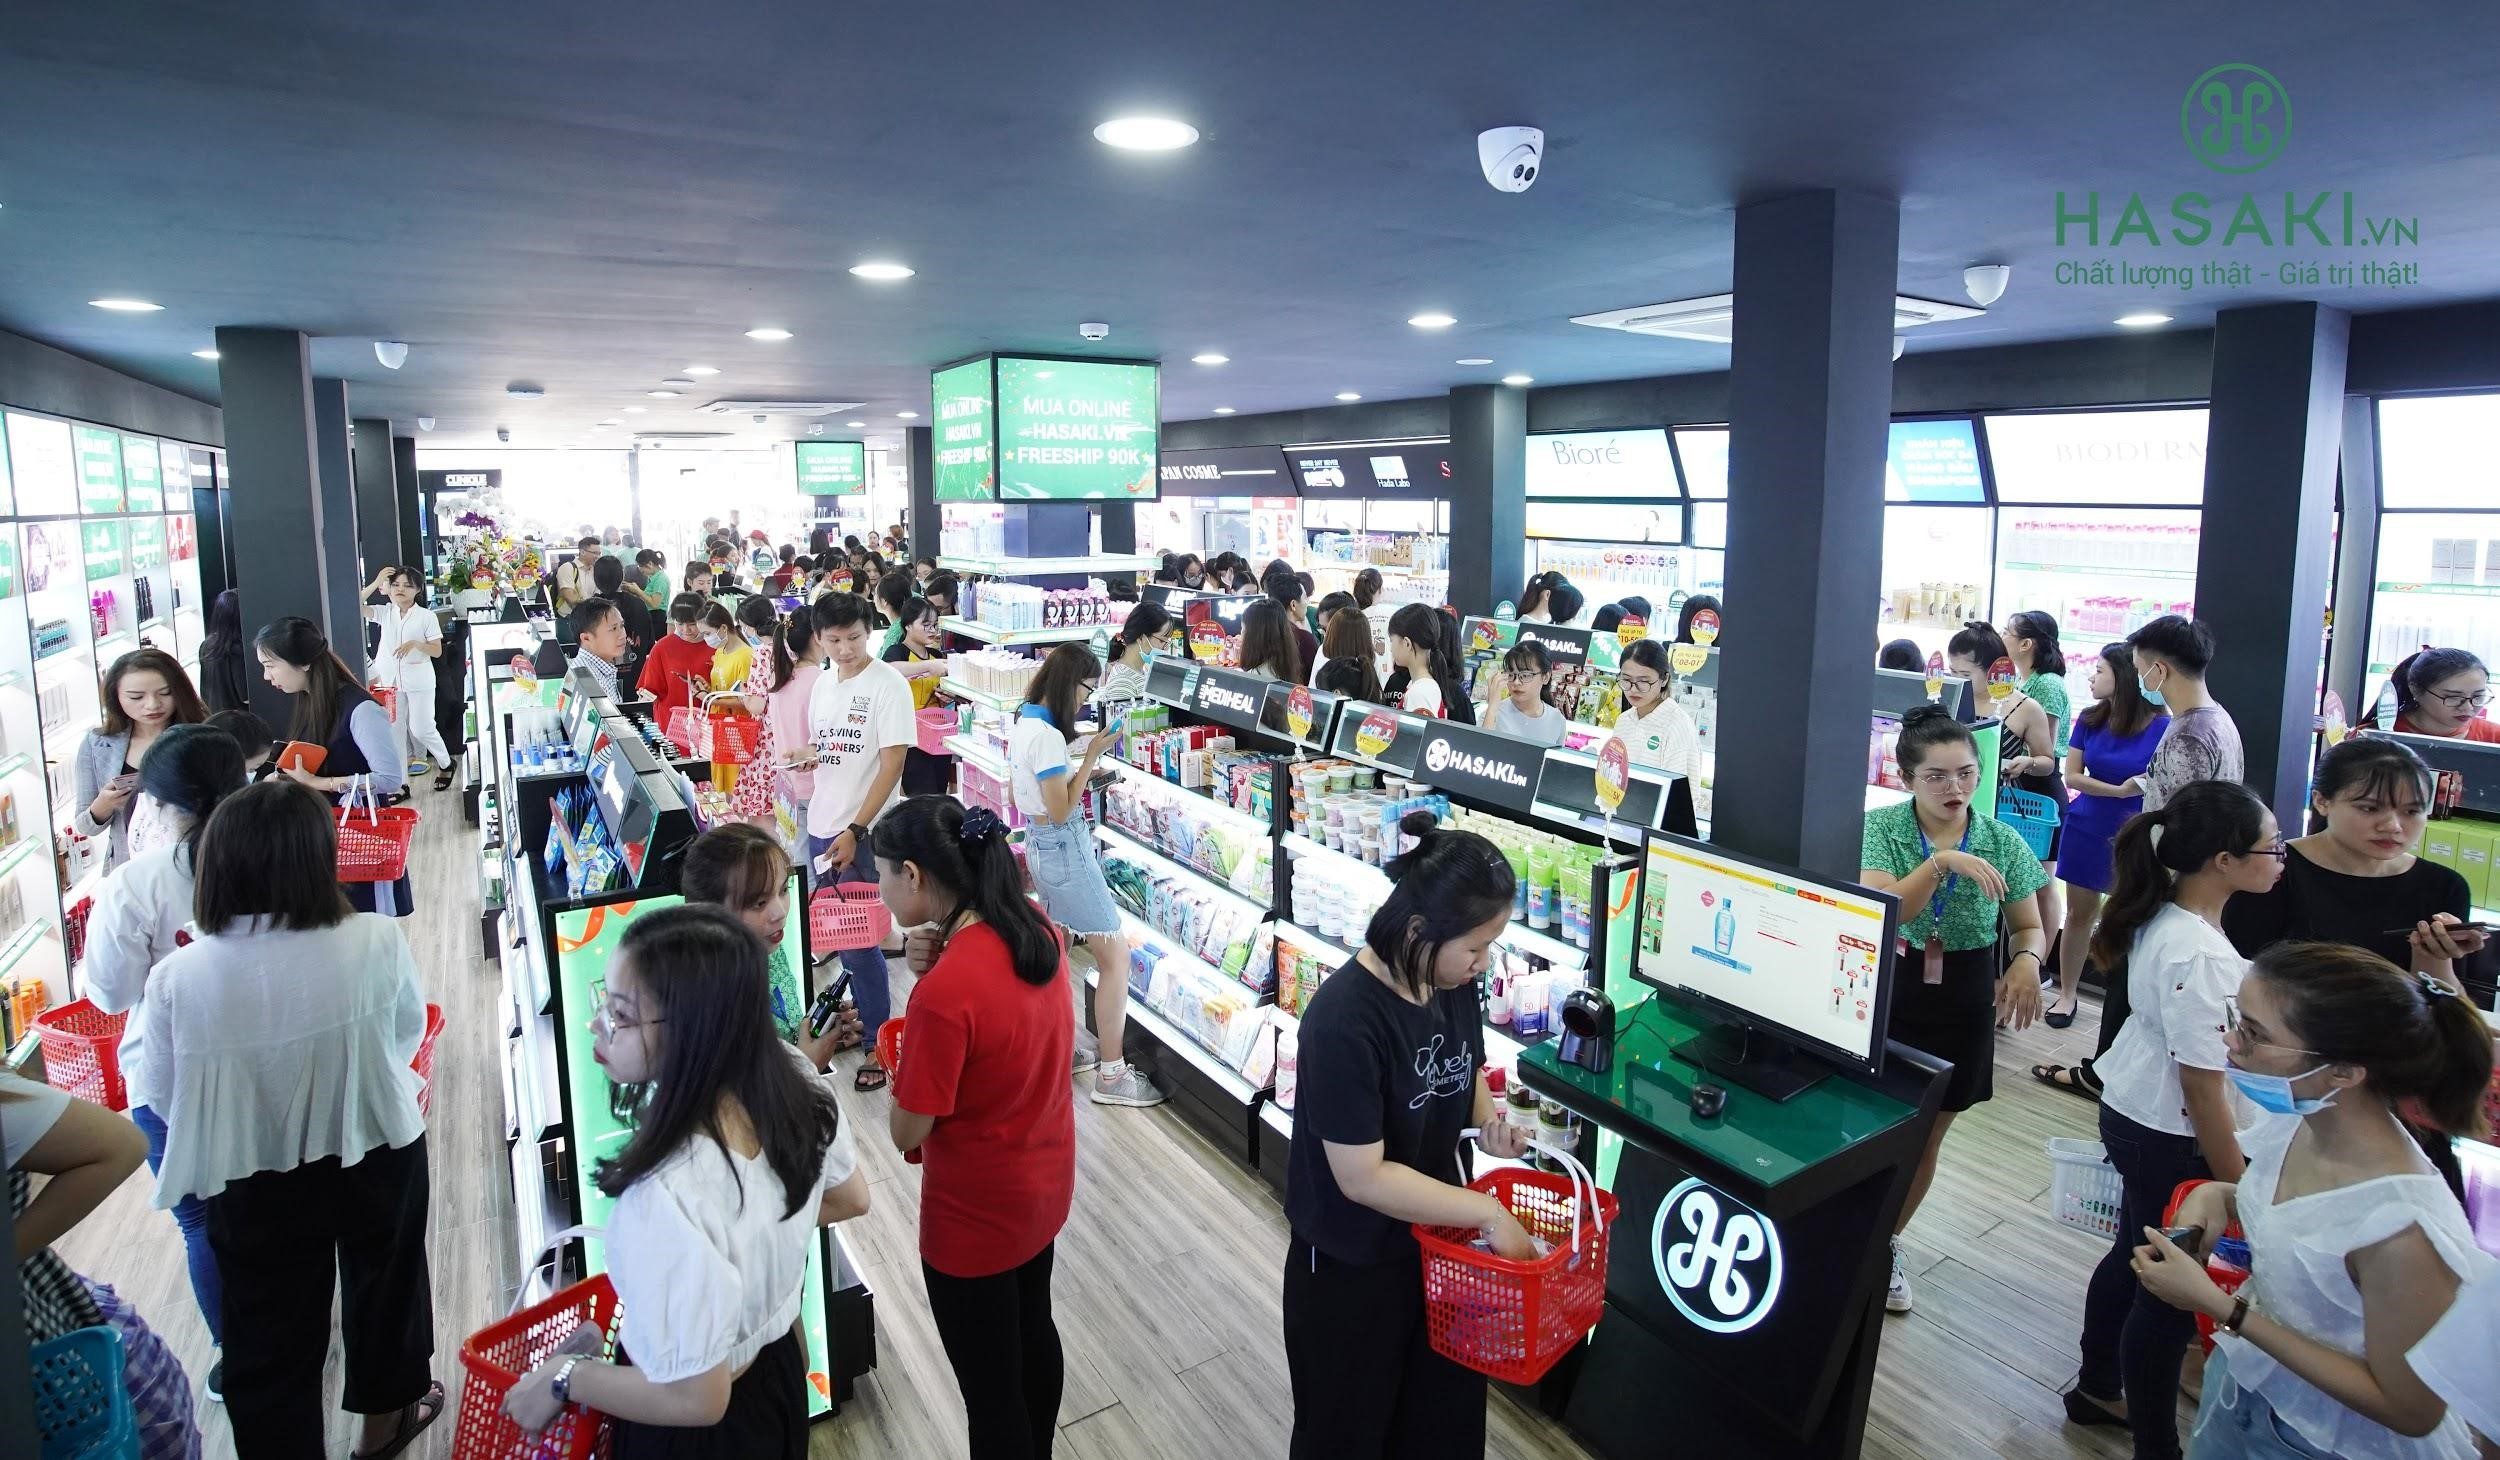 Alibaba unit to invest in Vietnamese beauty and personal care chain Hasaki